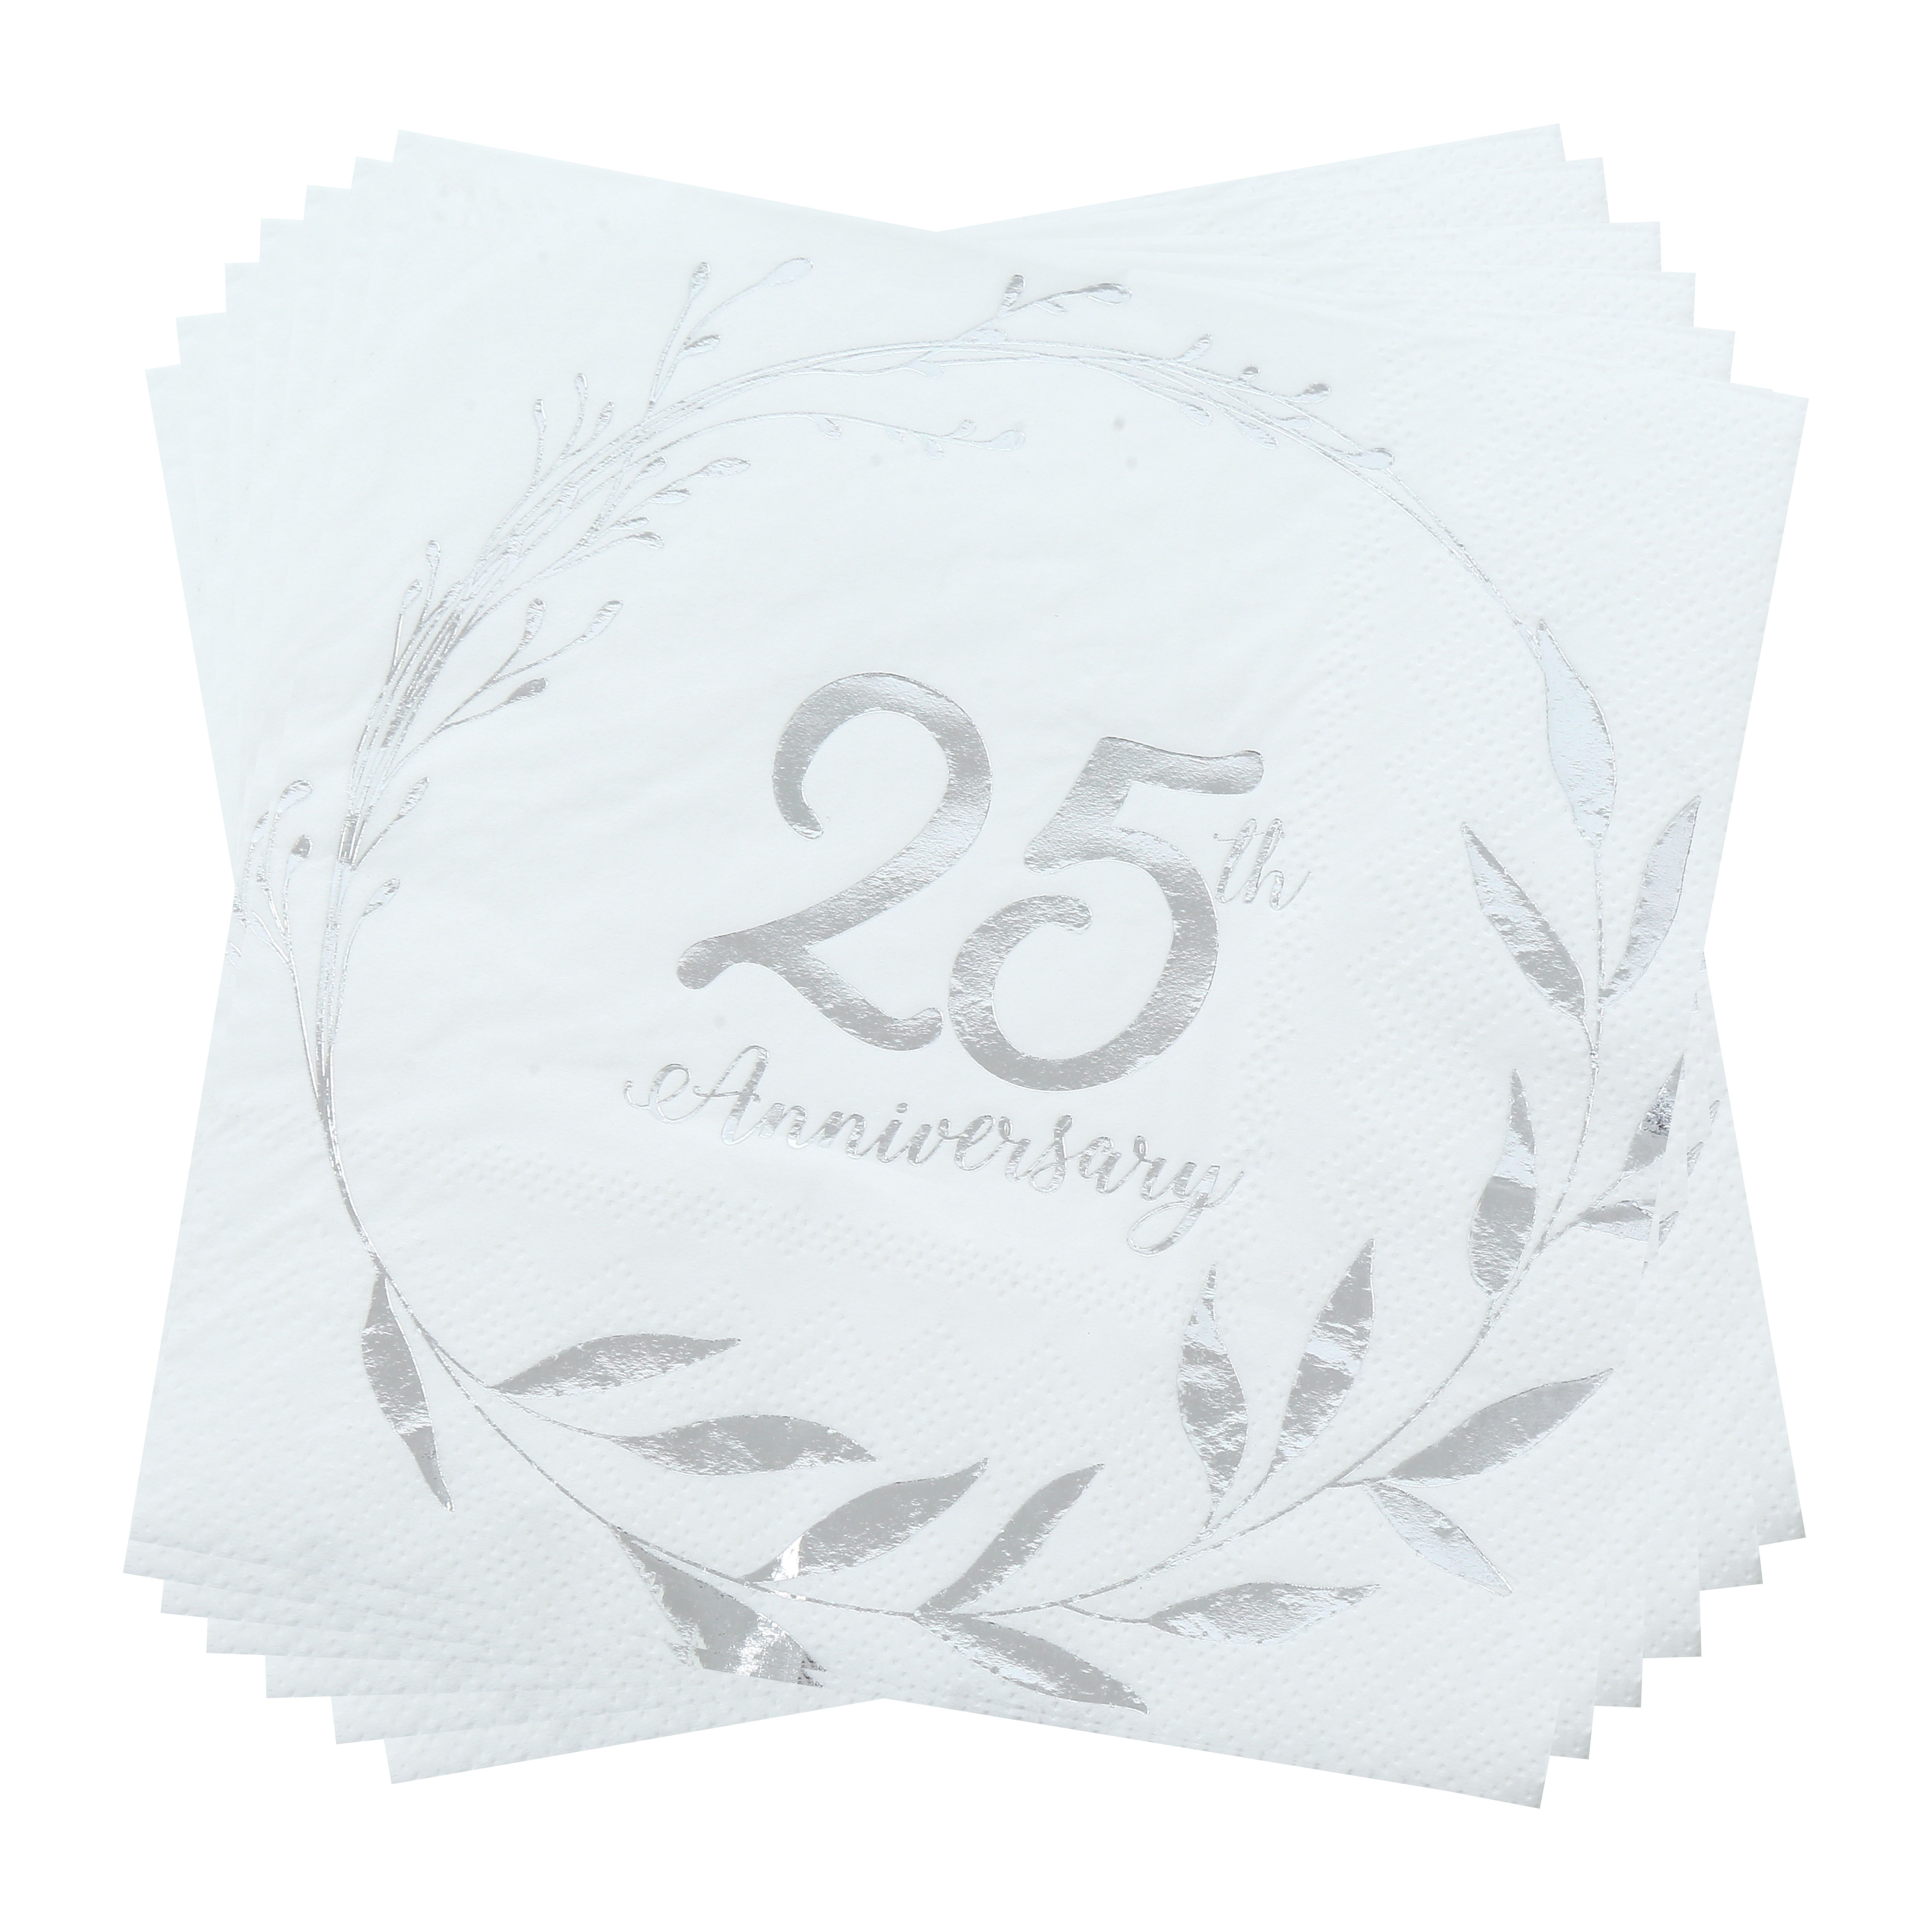 

Elegant 25th Anniversary Celebration Napkins - 32 Piece, 6.5"x6.5", Double-layered Paper Luncheon Napkins For Milestone Parties Napkin Holder For Table Decorative Paper Napkins